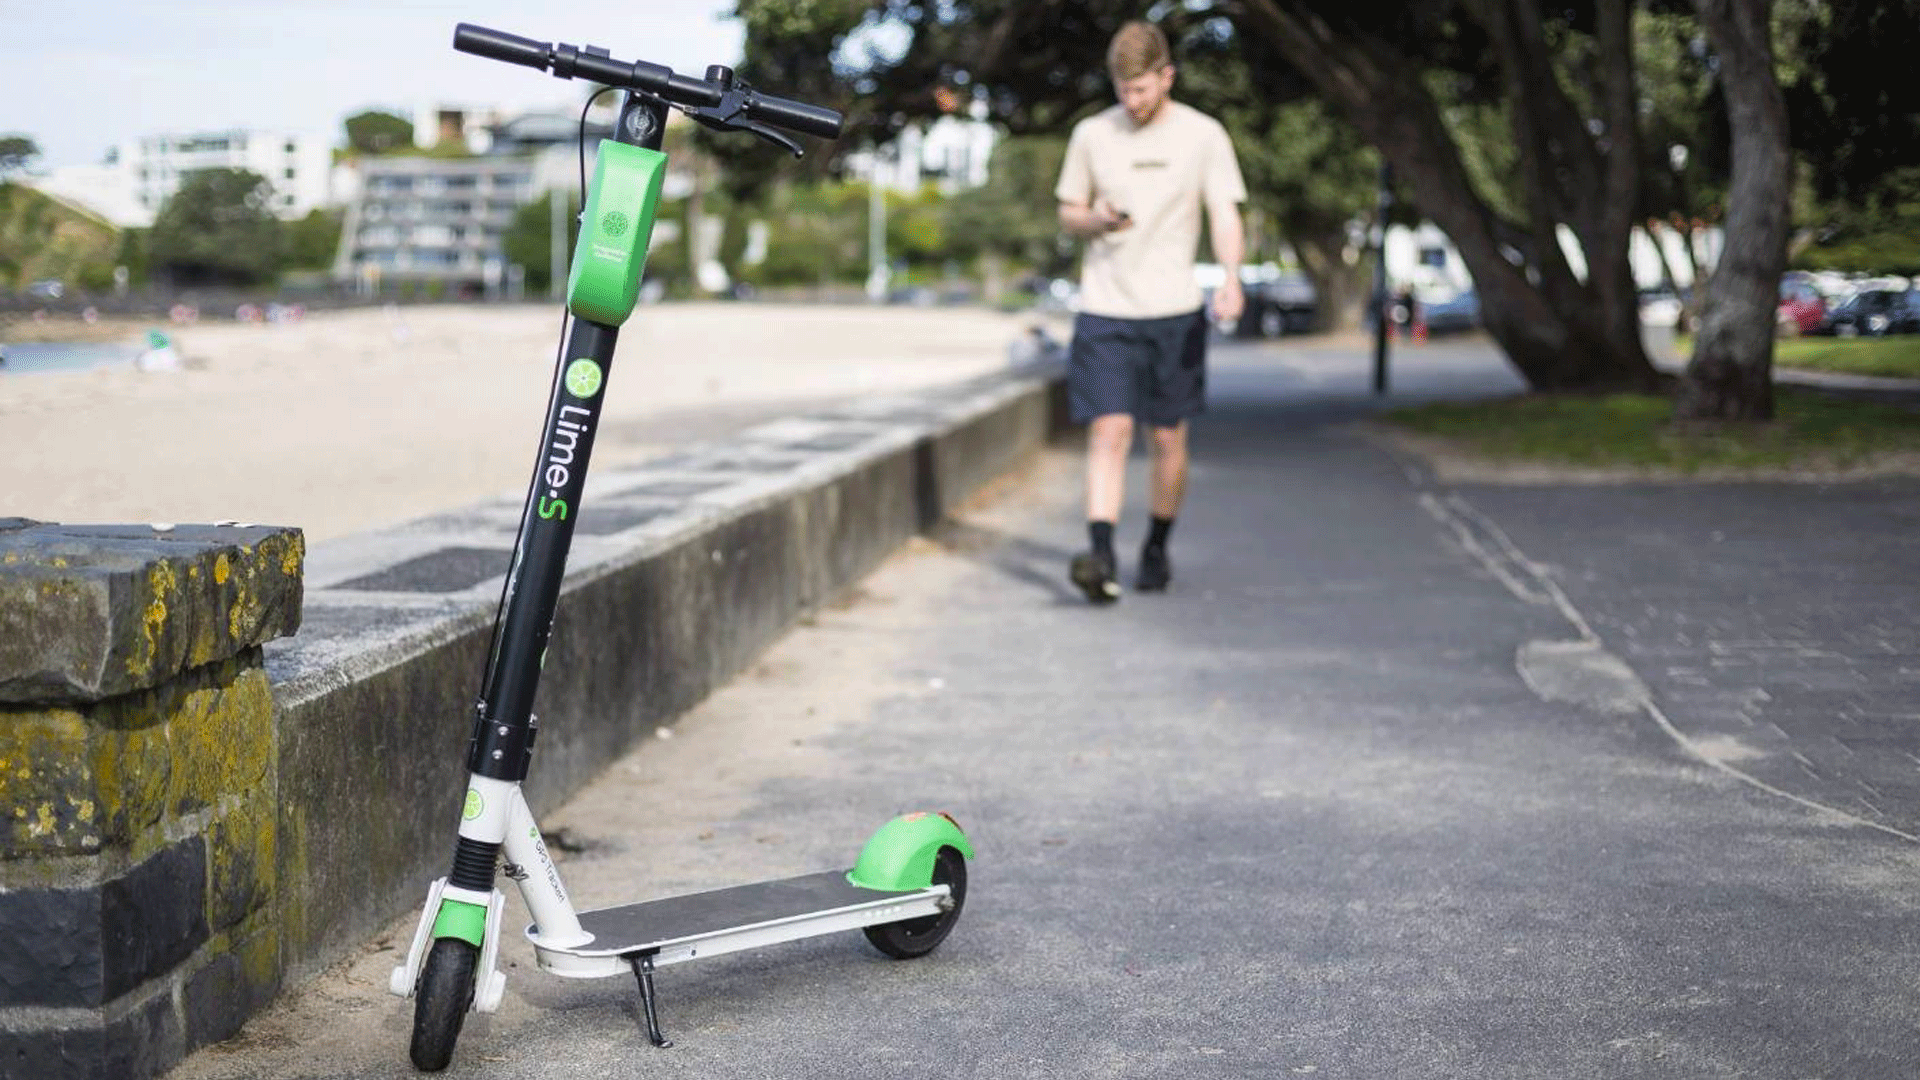 53 HQ Photos Lime Scooter App Brisbane : Uber Plans To Offer Scooter Rentals Through Its App Daily Mail Online